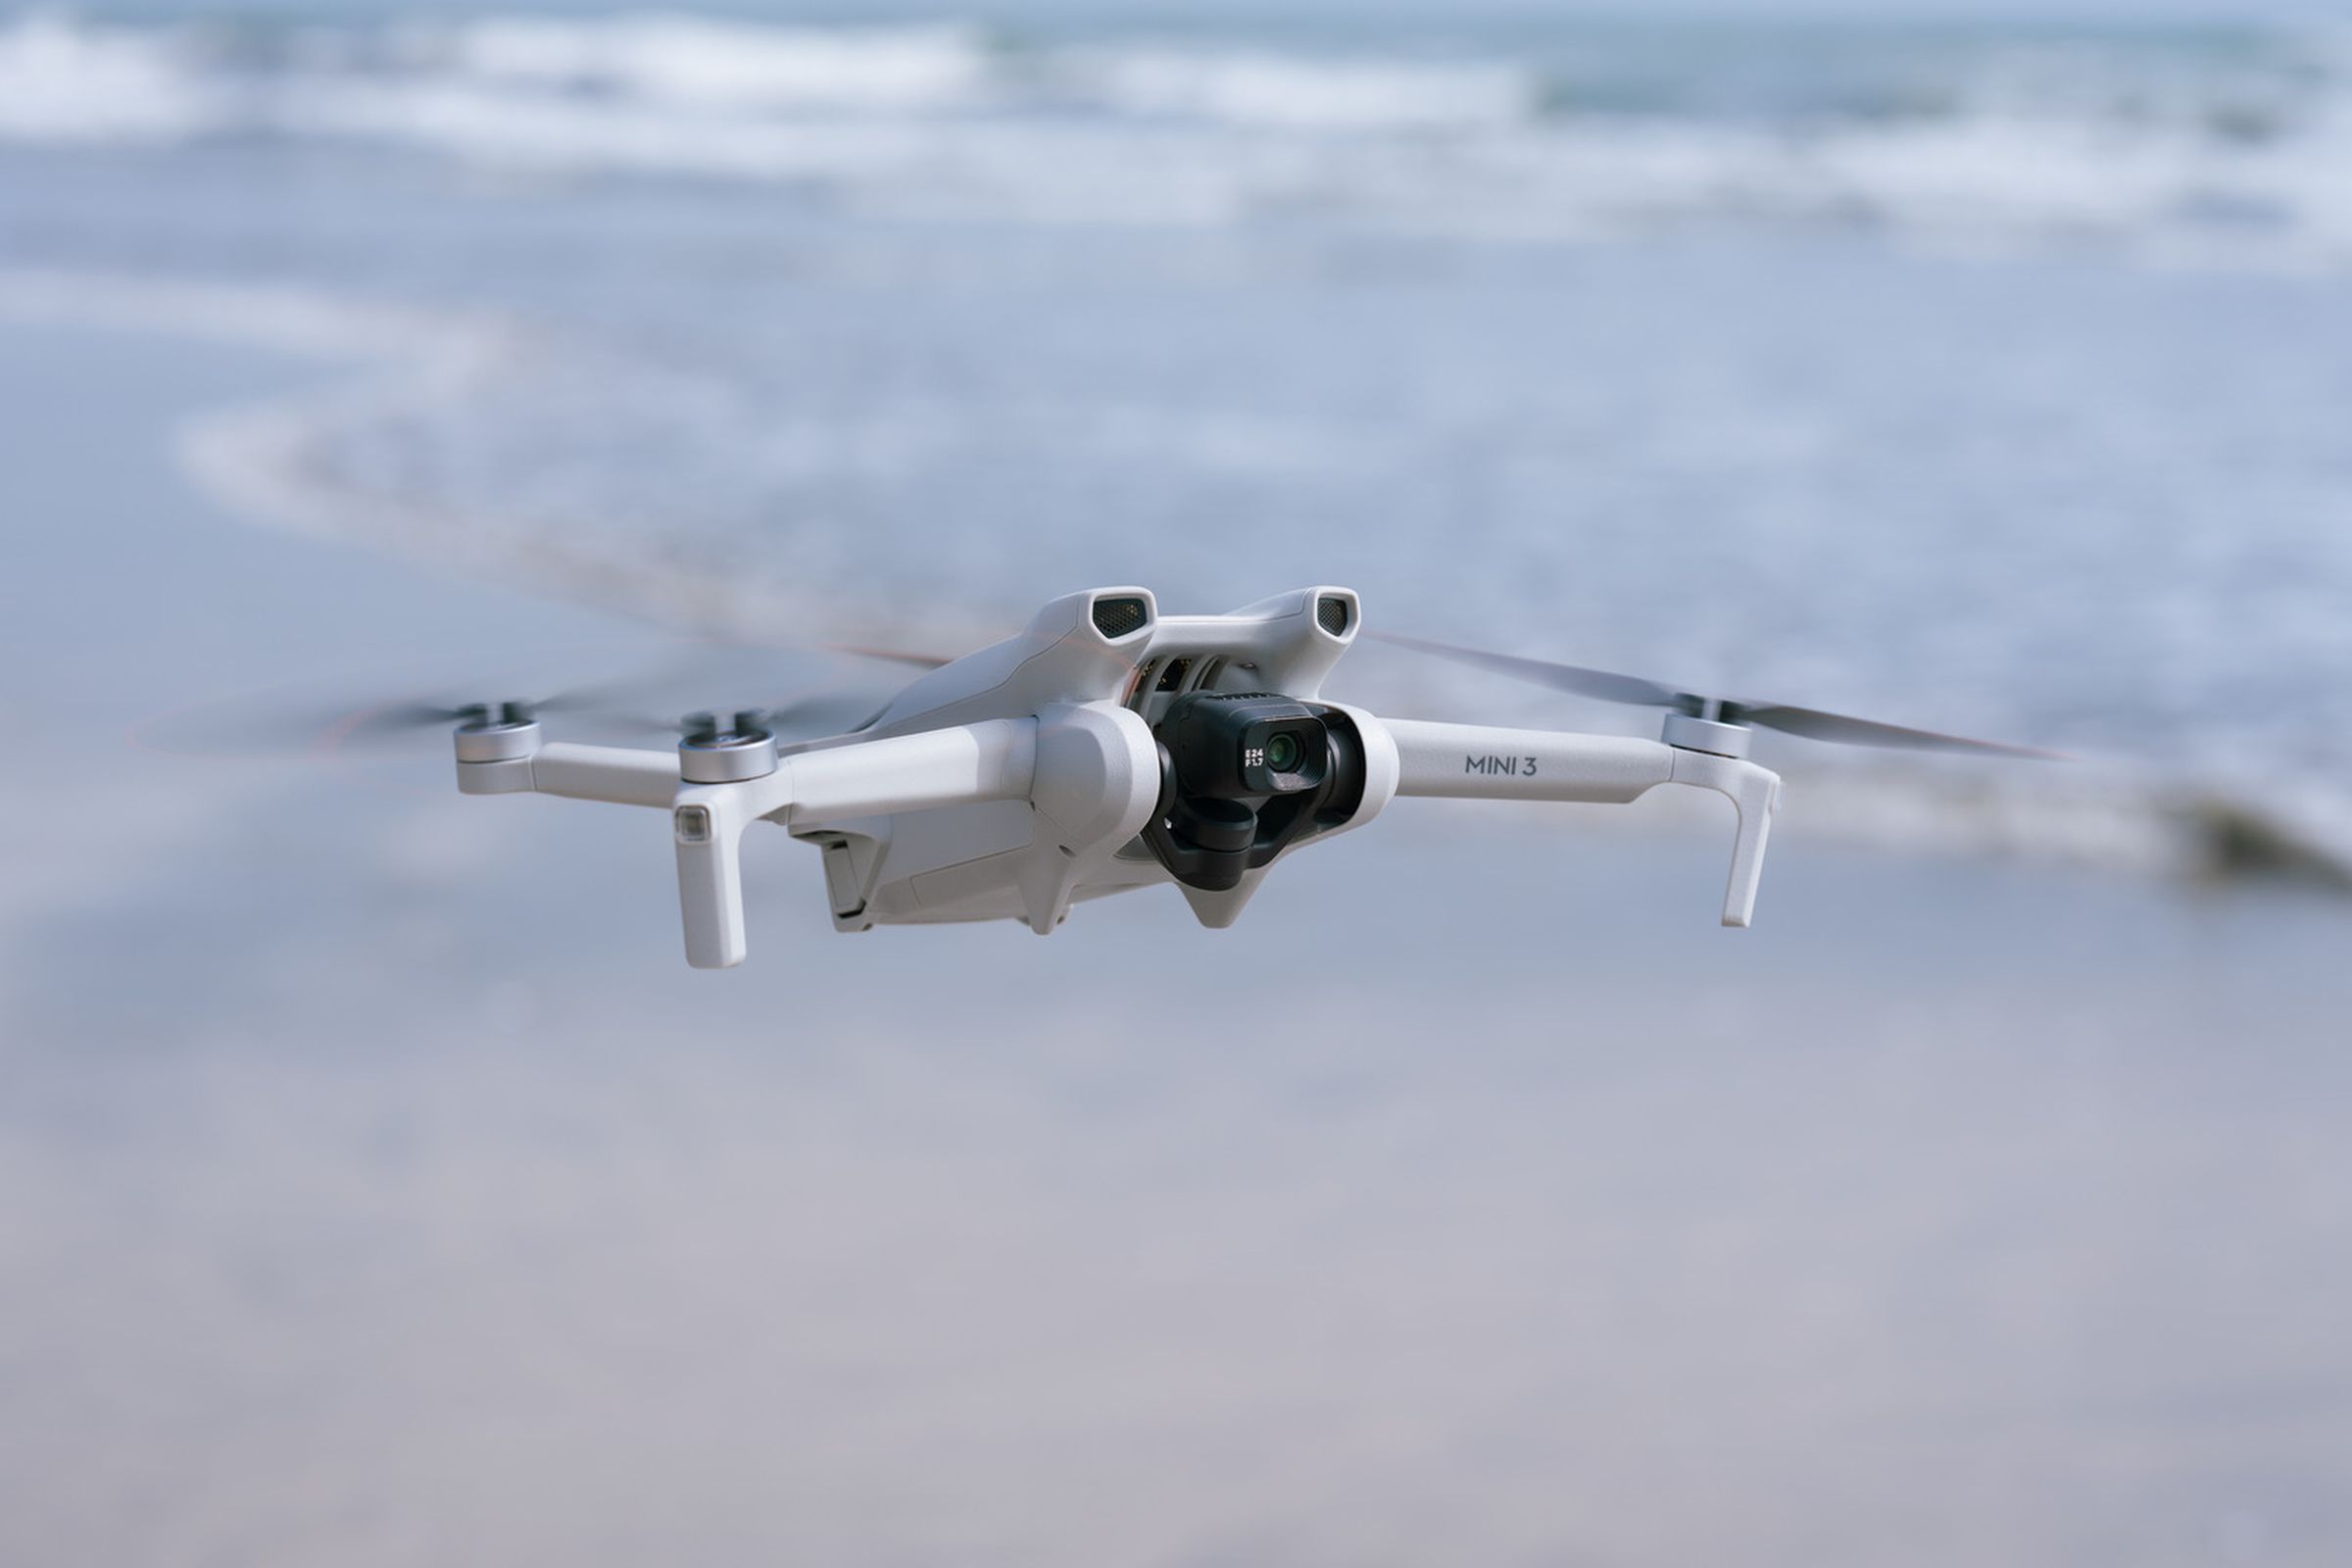 The DJI Mini 3 drone flying on the beach, with the sea in the background.